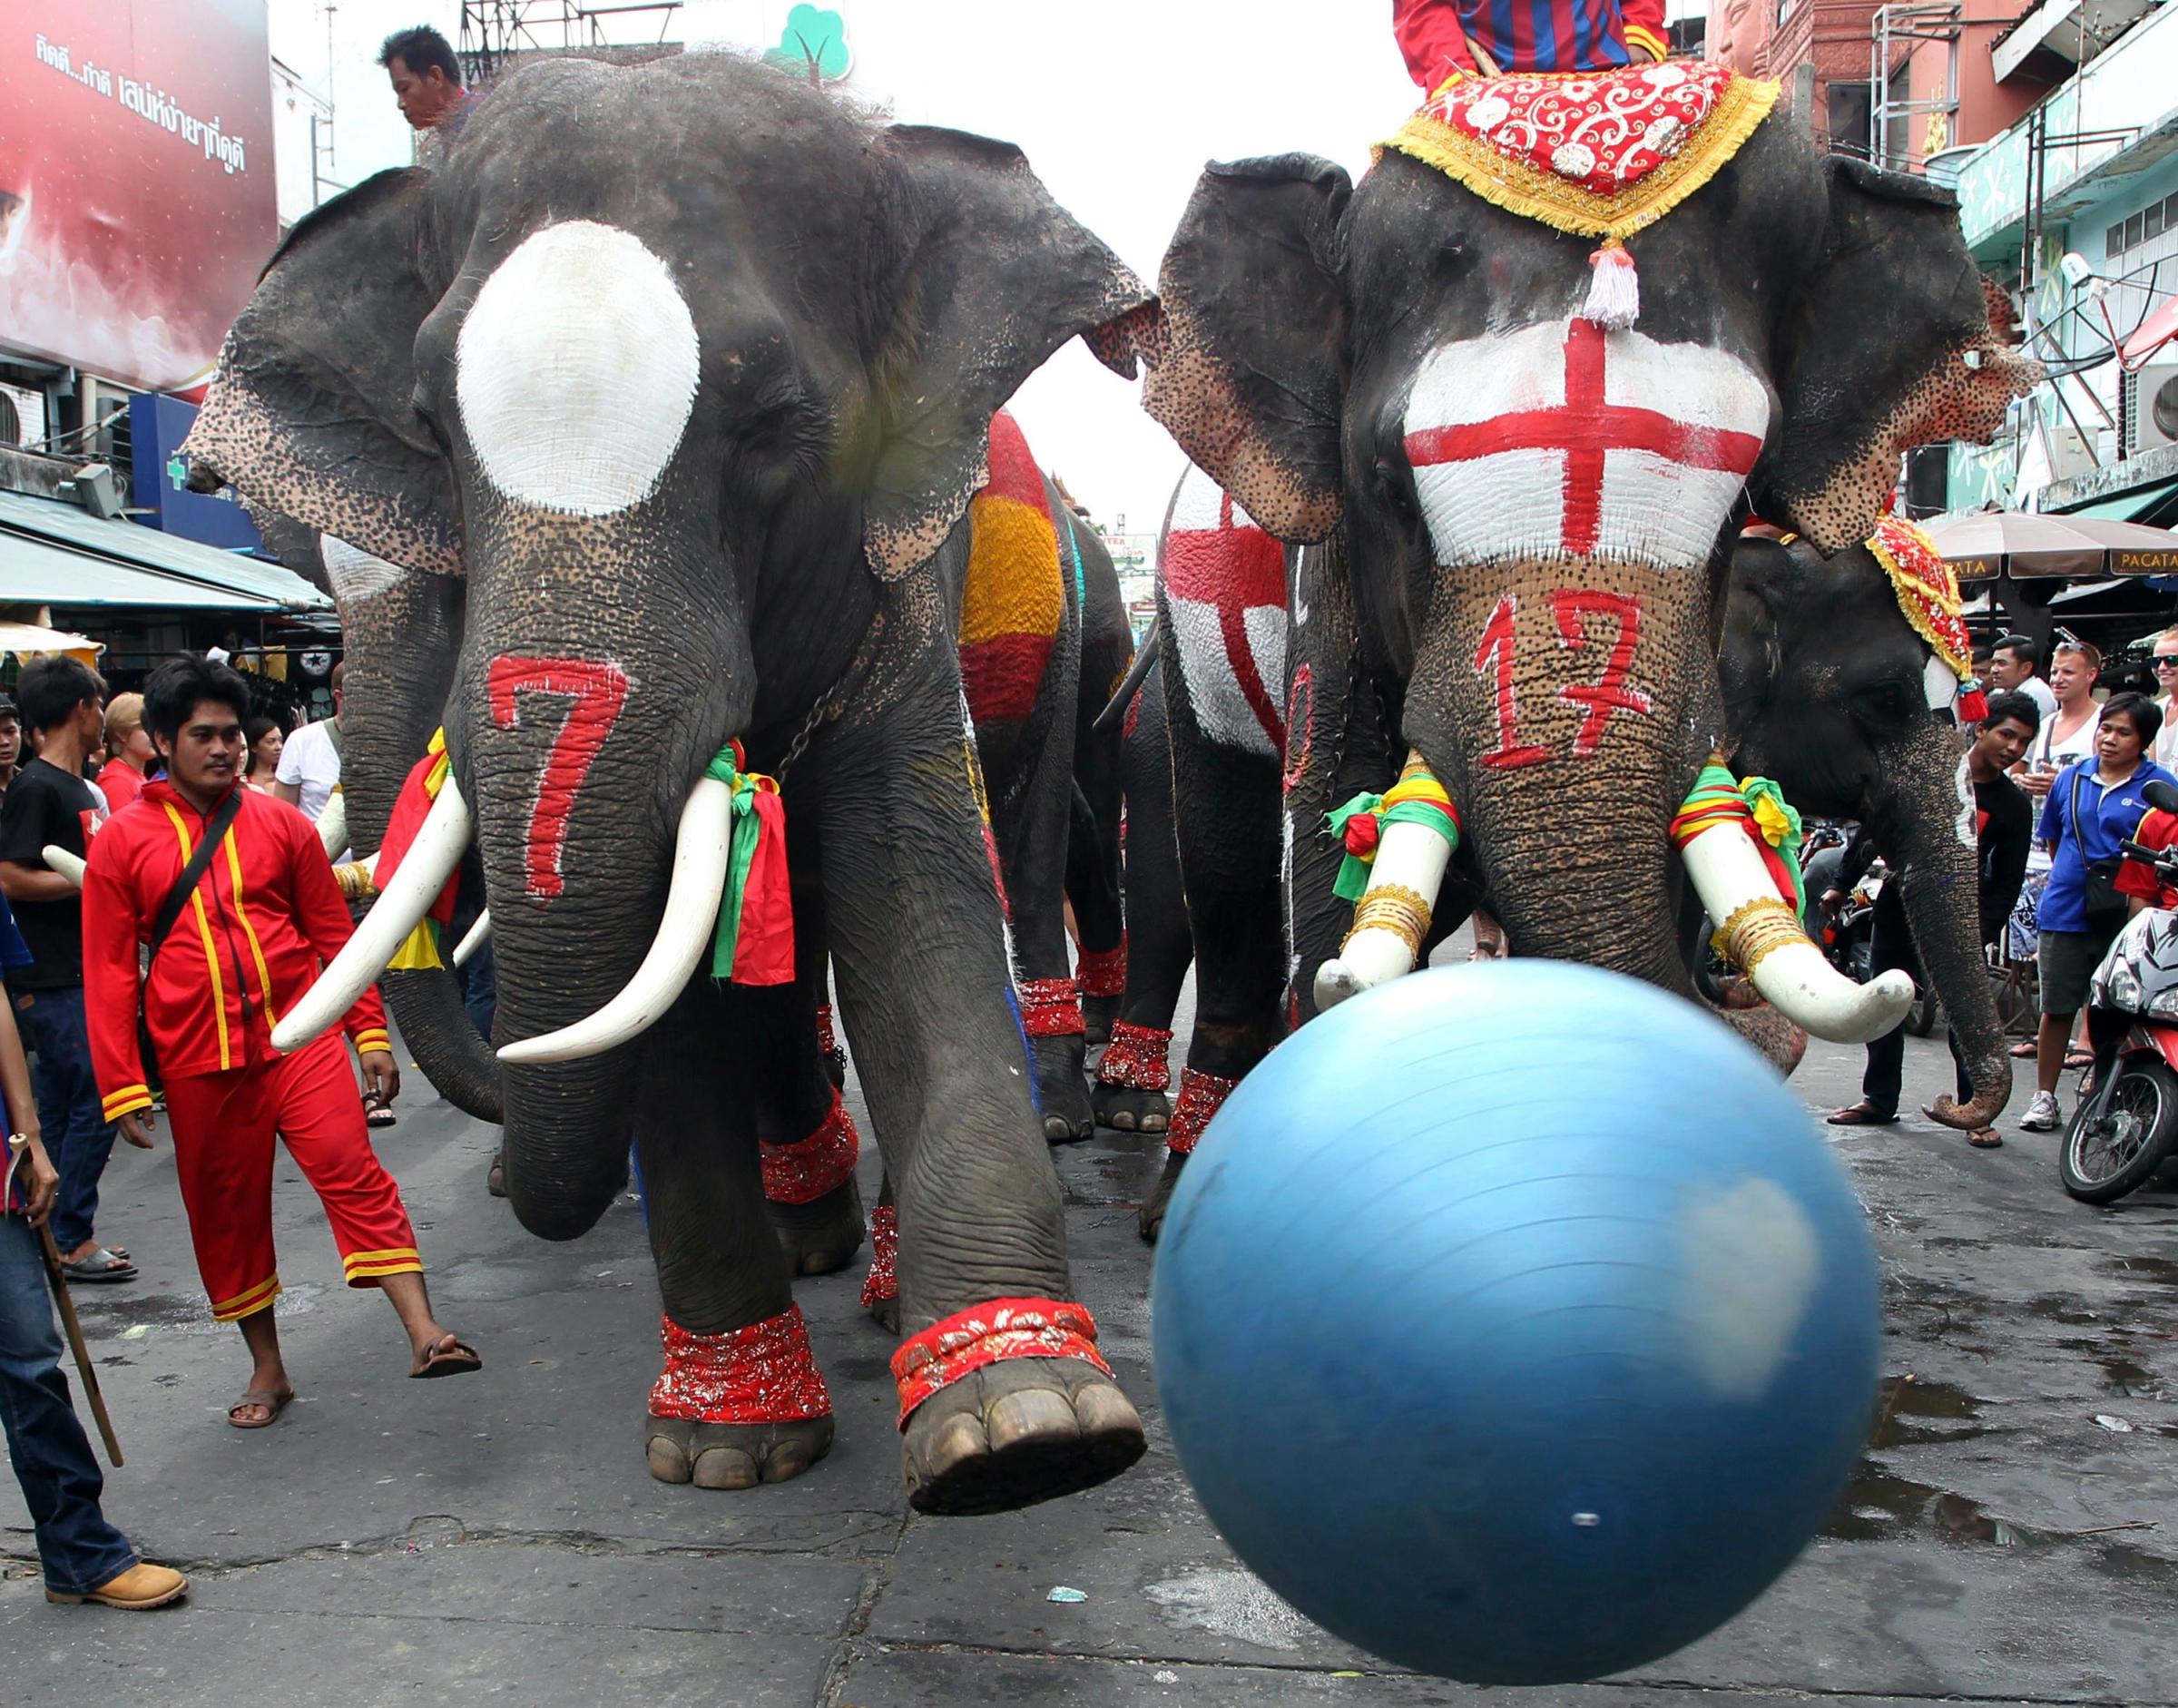 Elephants fight for the ball during an event to celebrate the opening of the World Cup soccer tournament in Brazil at a popular tourist destination in Bangkok, Thailand on Friday, June 13, 2014.